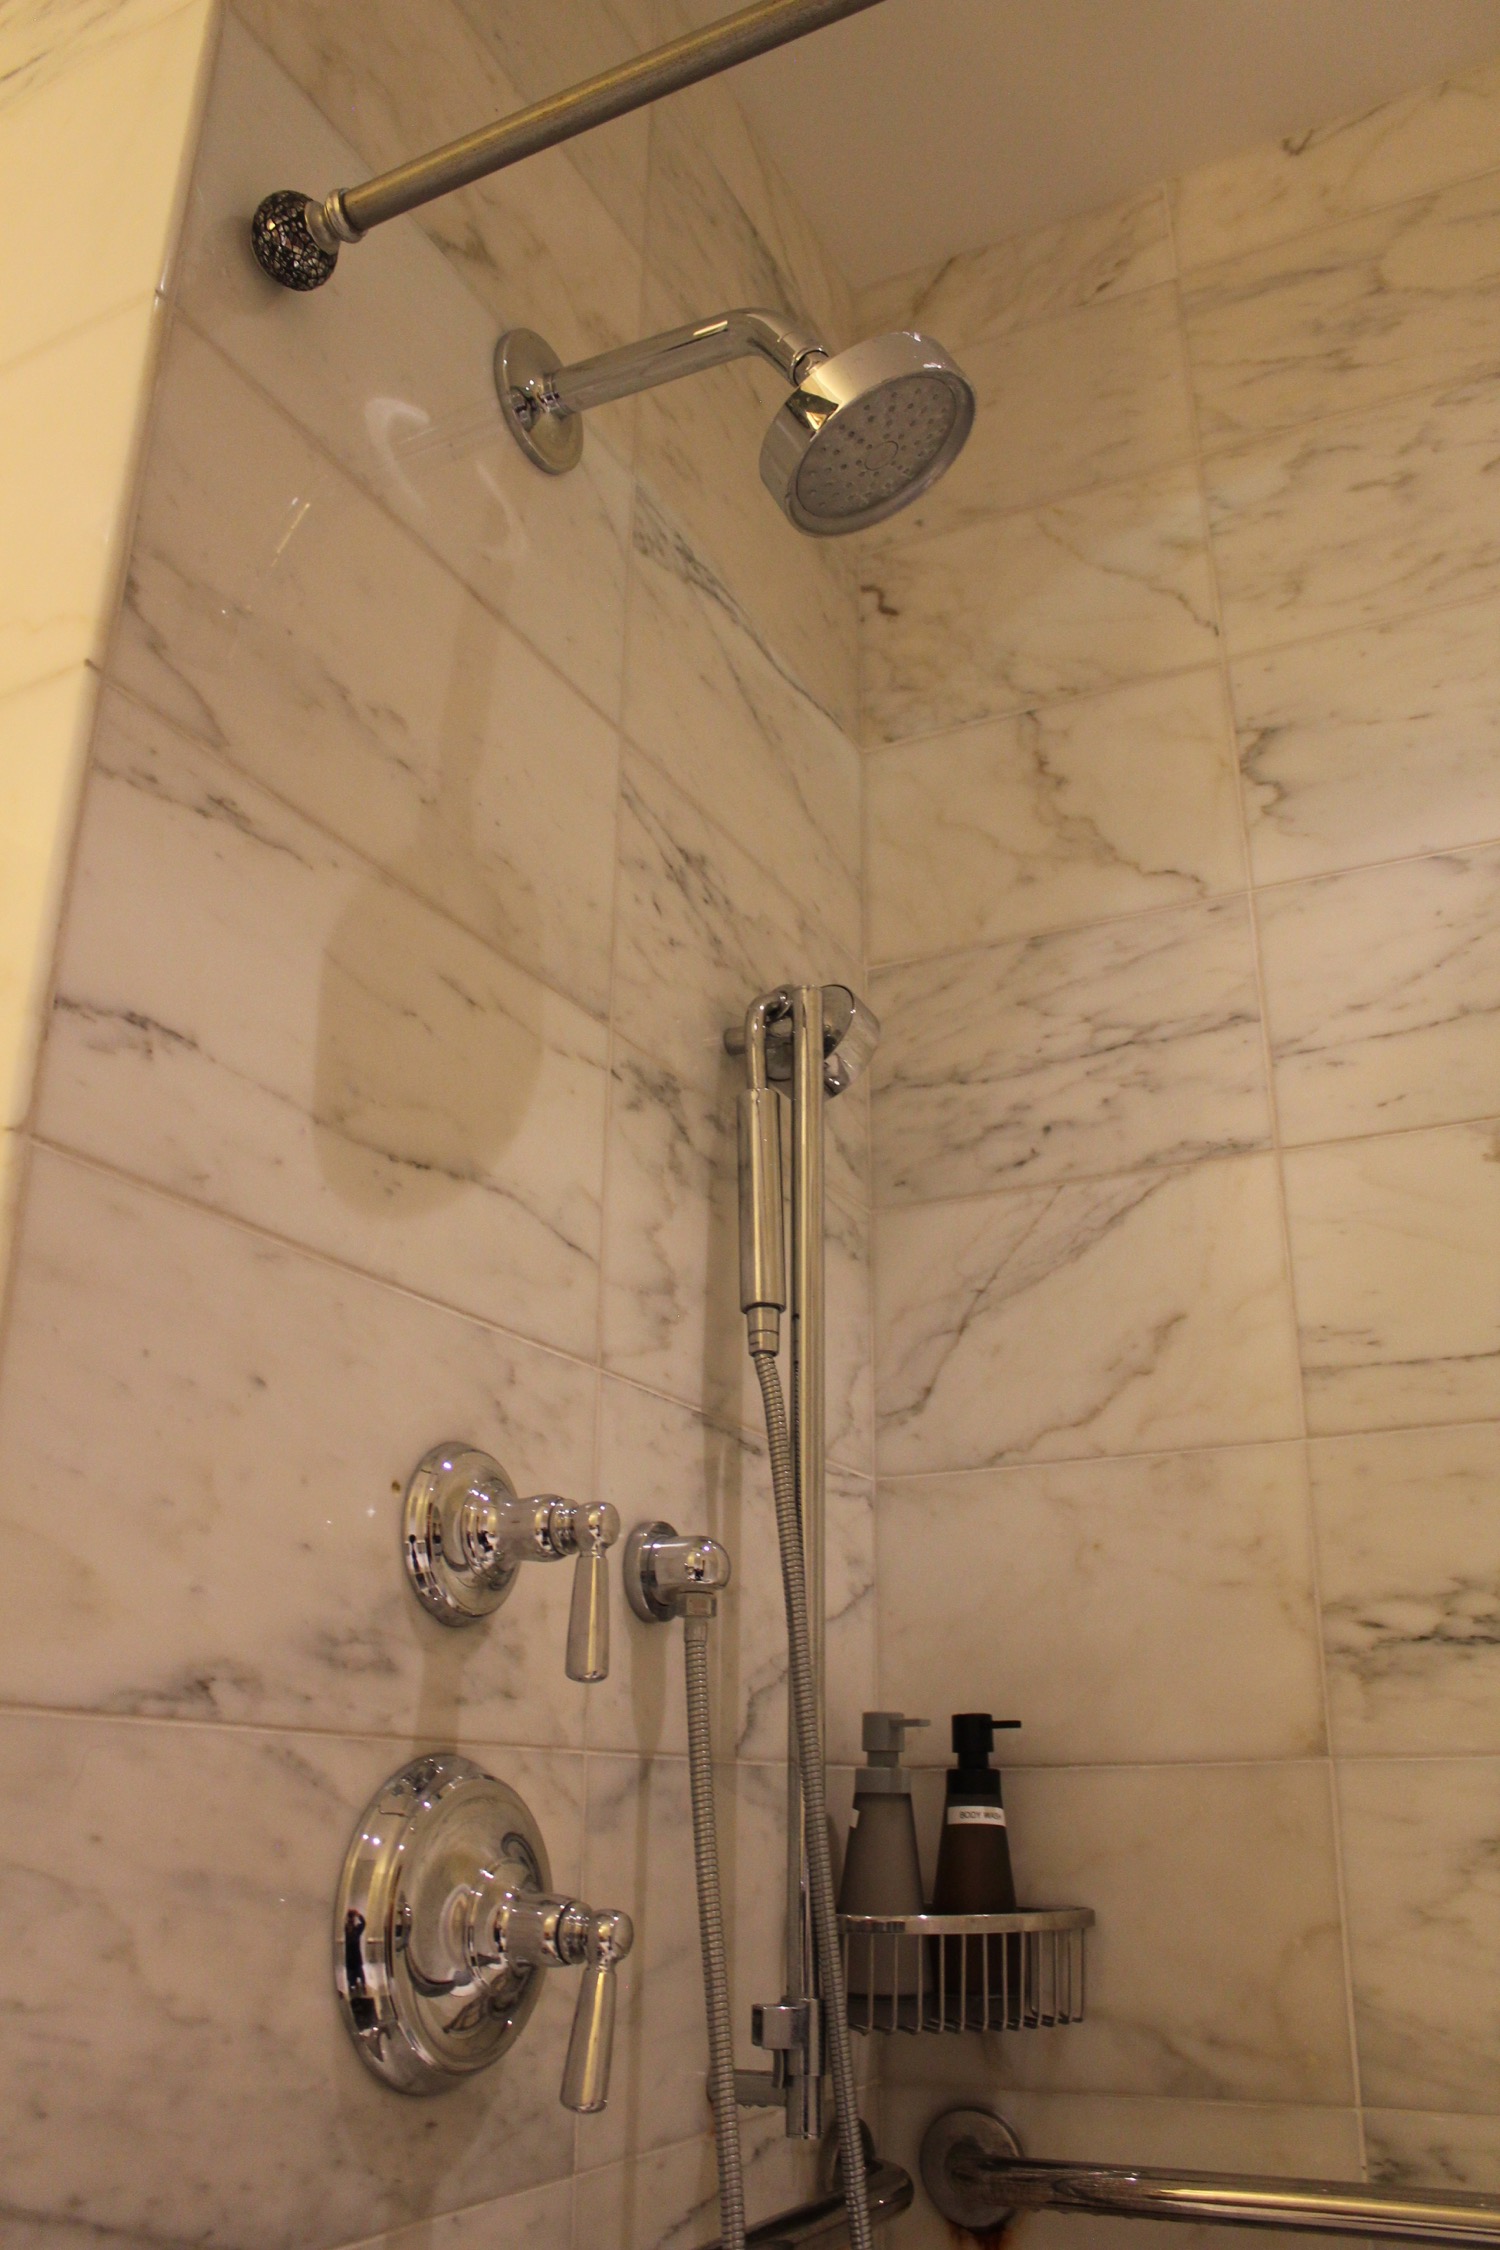 a shower head and faucet in a bathroom